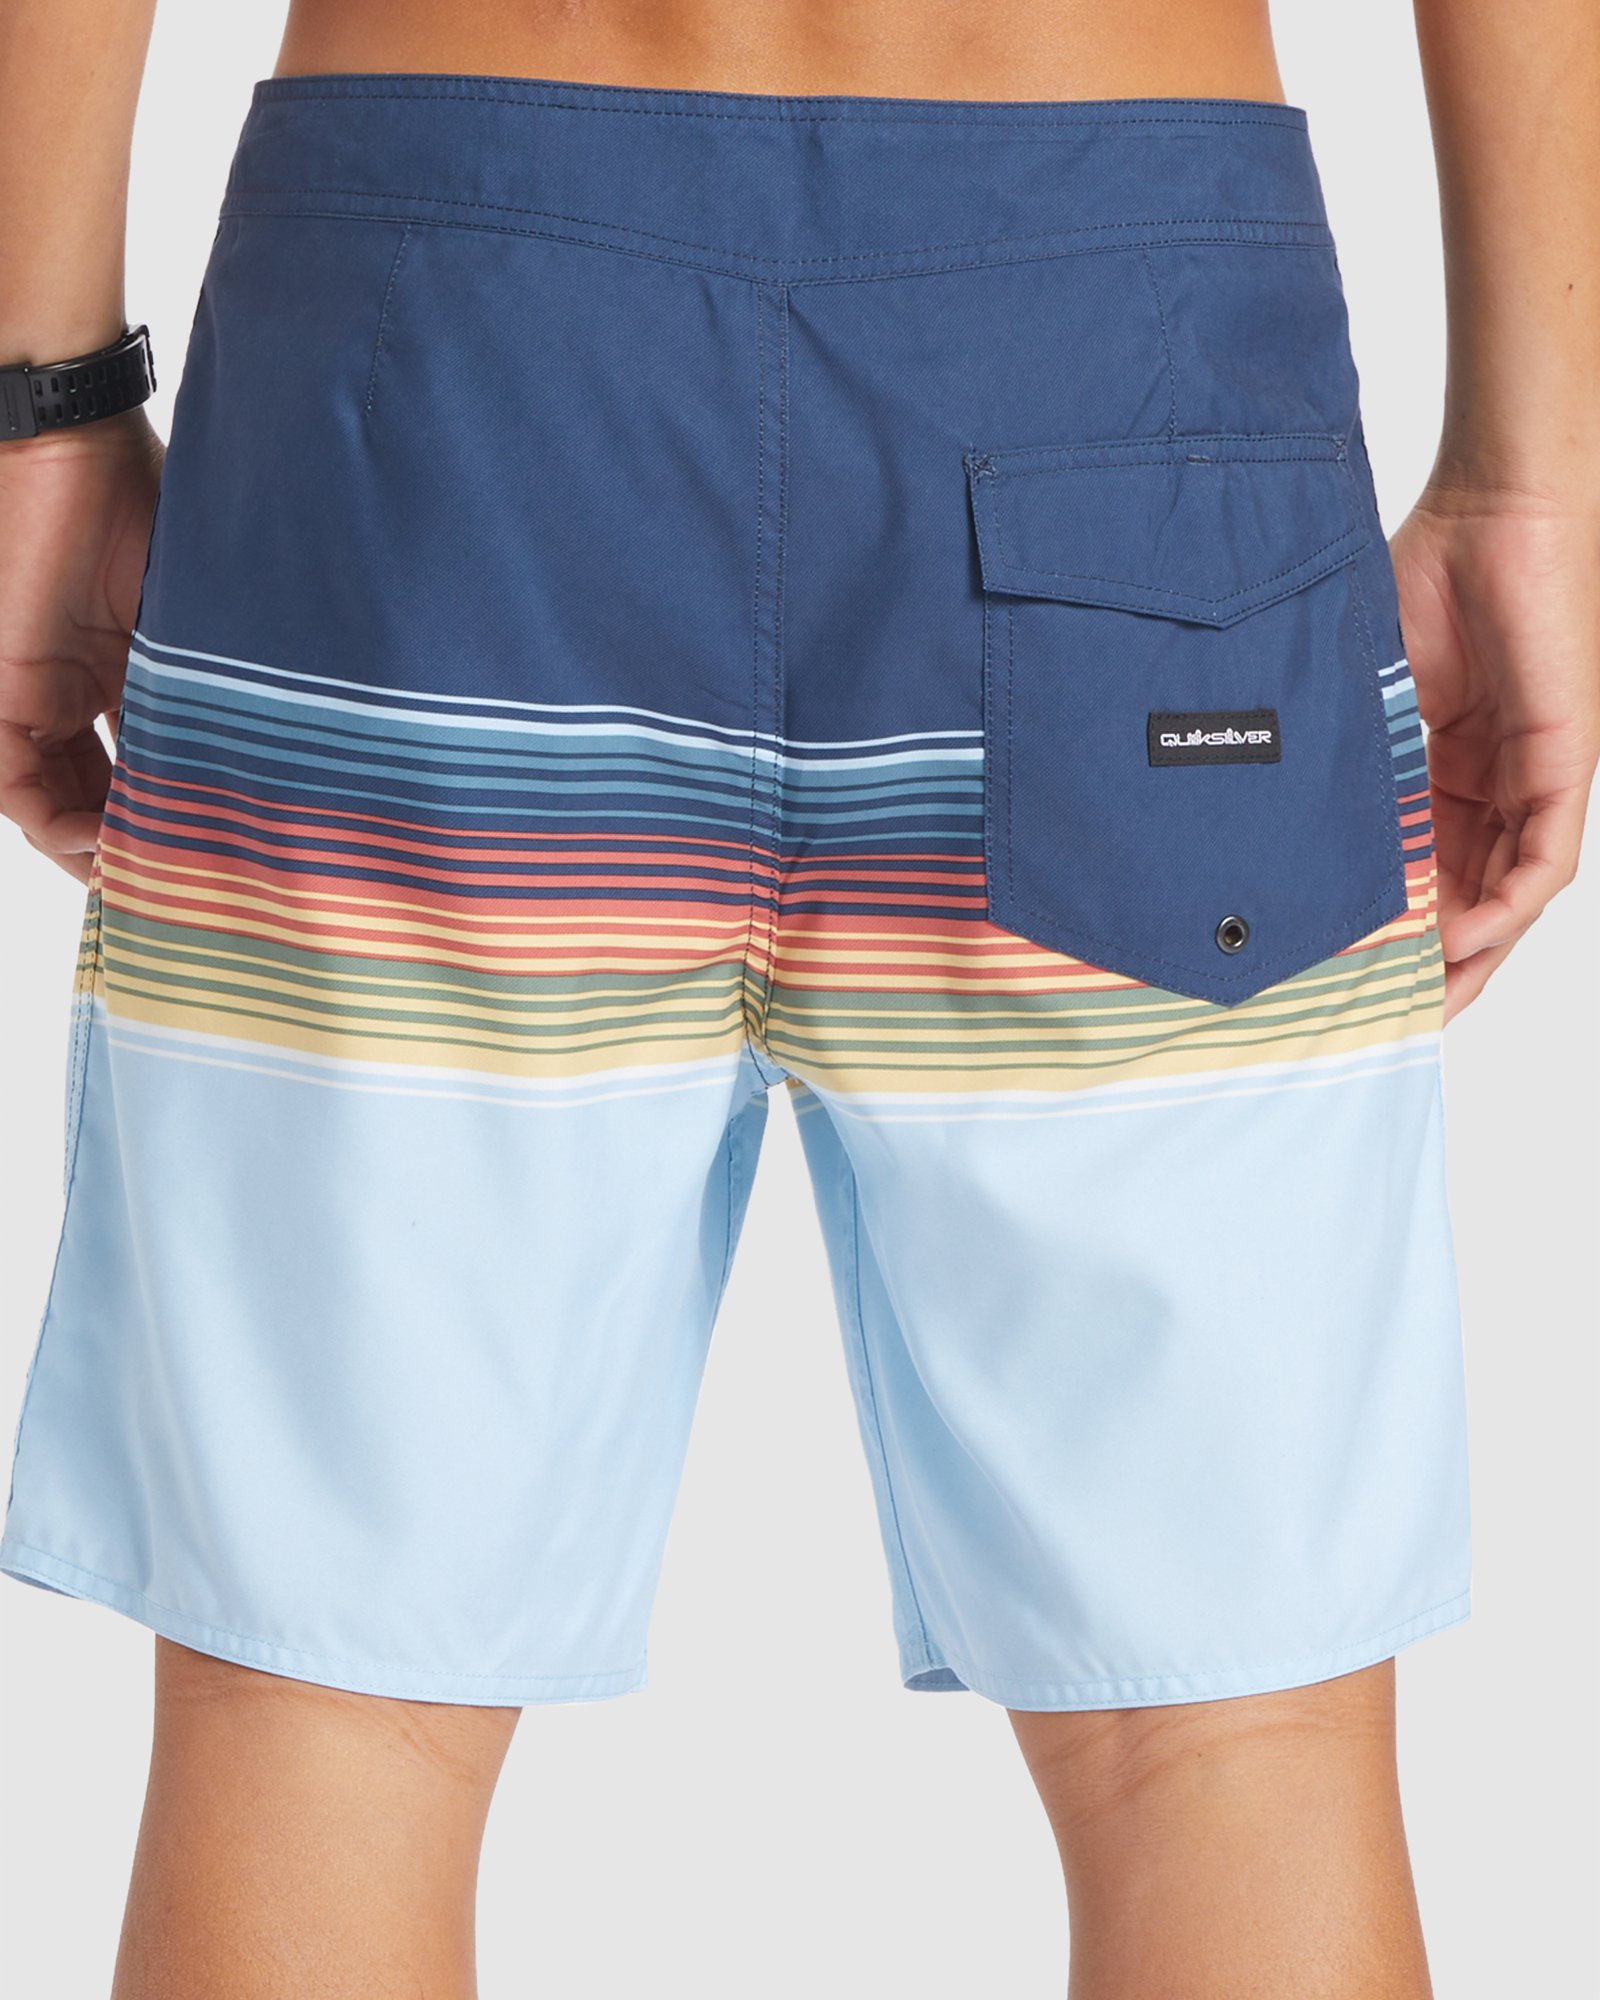 Quiksilver Mens Everyday Swell Vision 18 Inch Board Shorts - Midnight ...